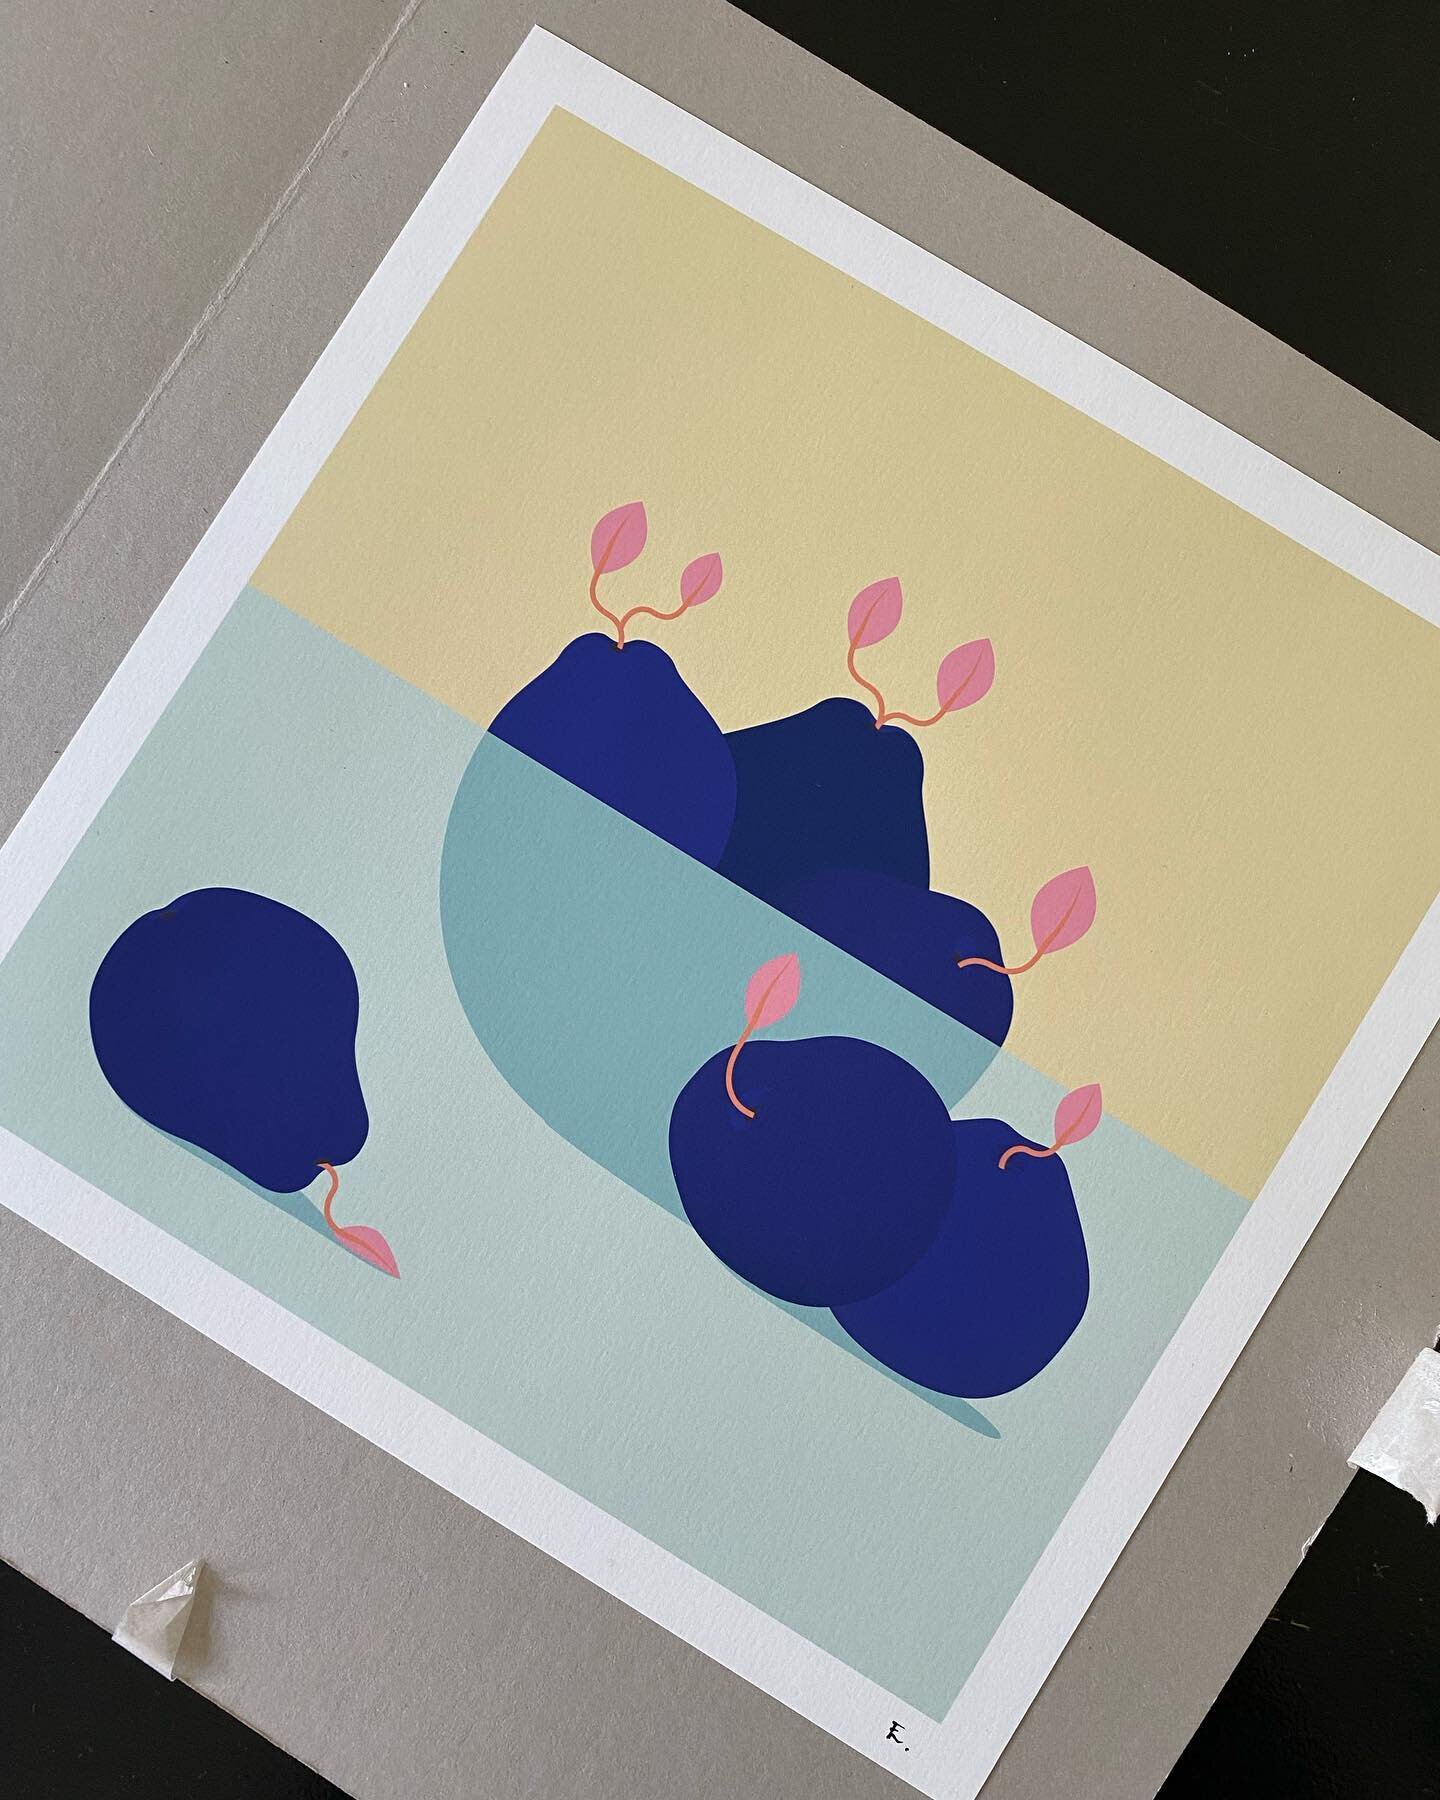 &lsquo;Future fruits&rsquo; is now available to purchase from my webshop!💥Quality print on 200gsm Hahnemule acid free paper. The color depth on these are amazing! *Shipping to Norway and EU only*